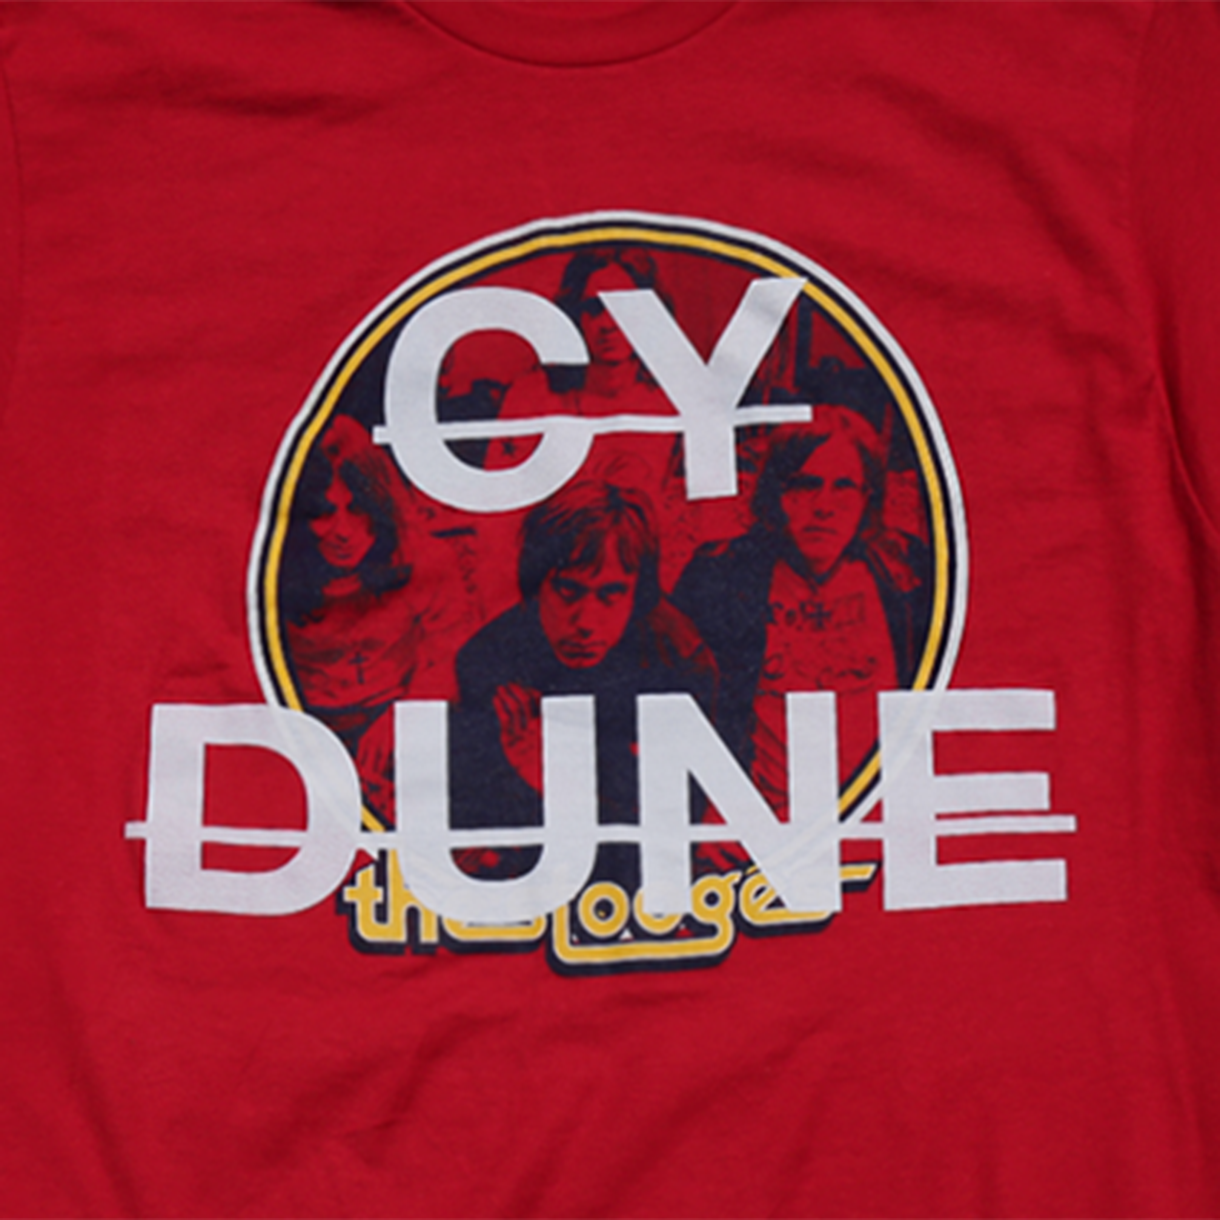 Cy Dune Stooges Shirt (Large)